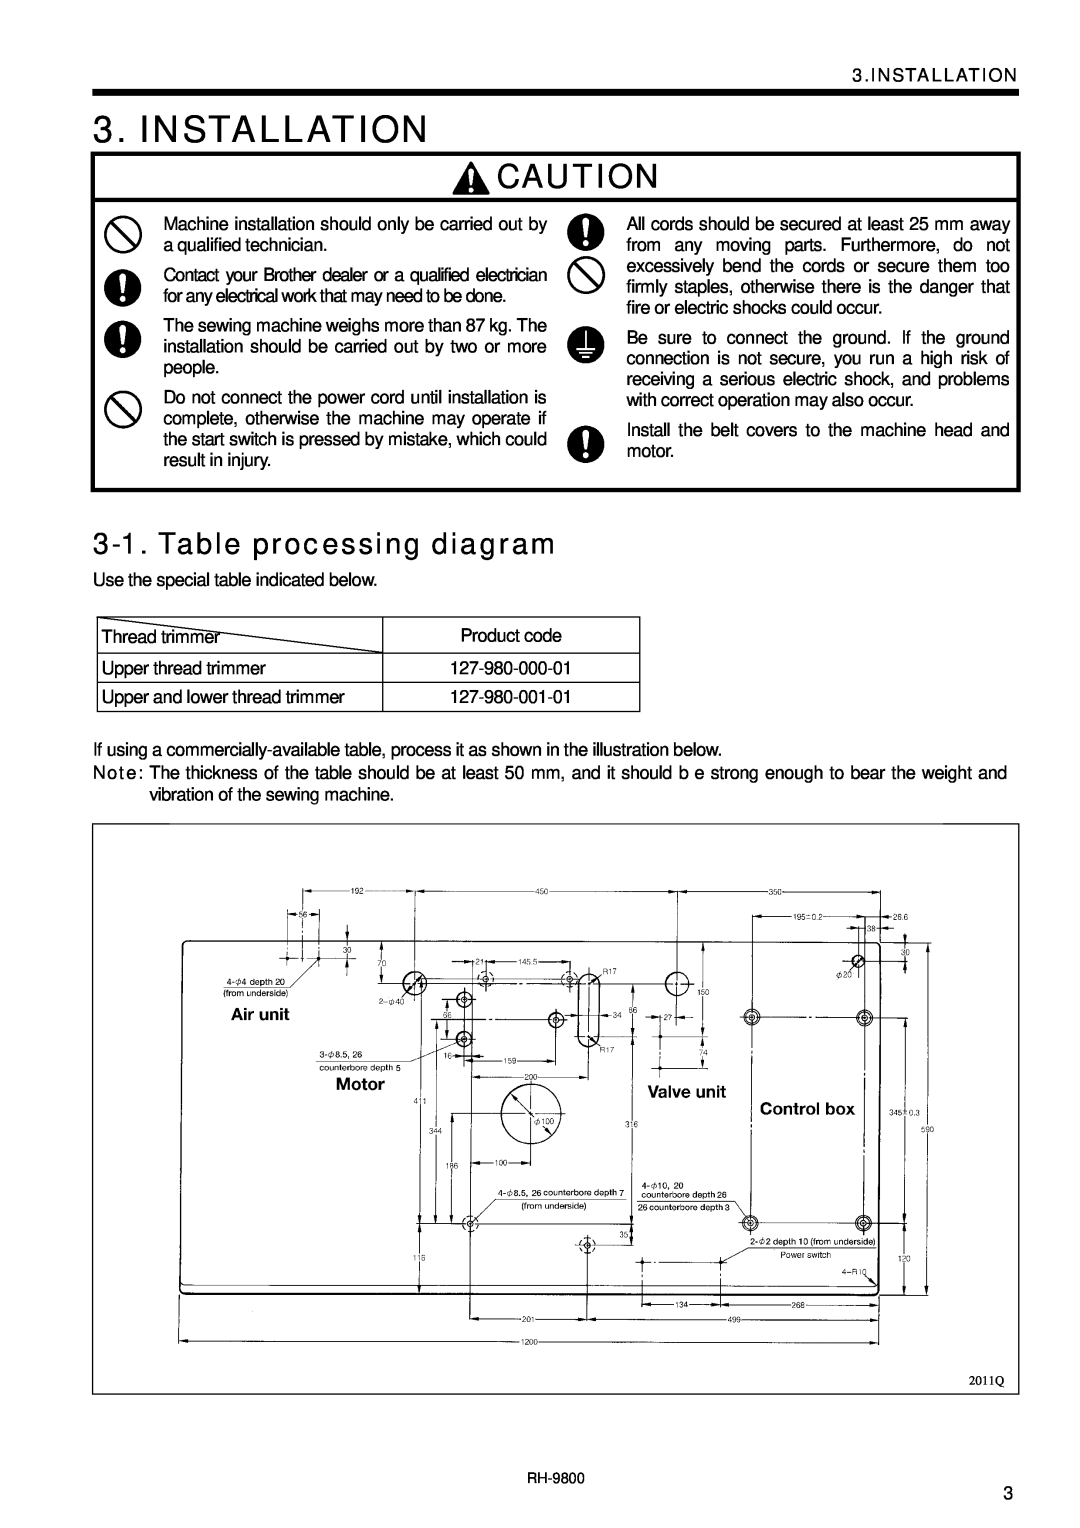 Brother DH4-B980 instruction manual Installation, Table processing diagram 